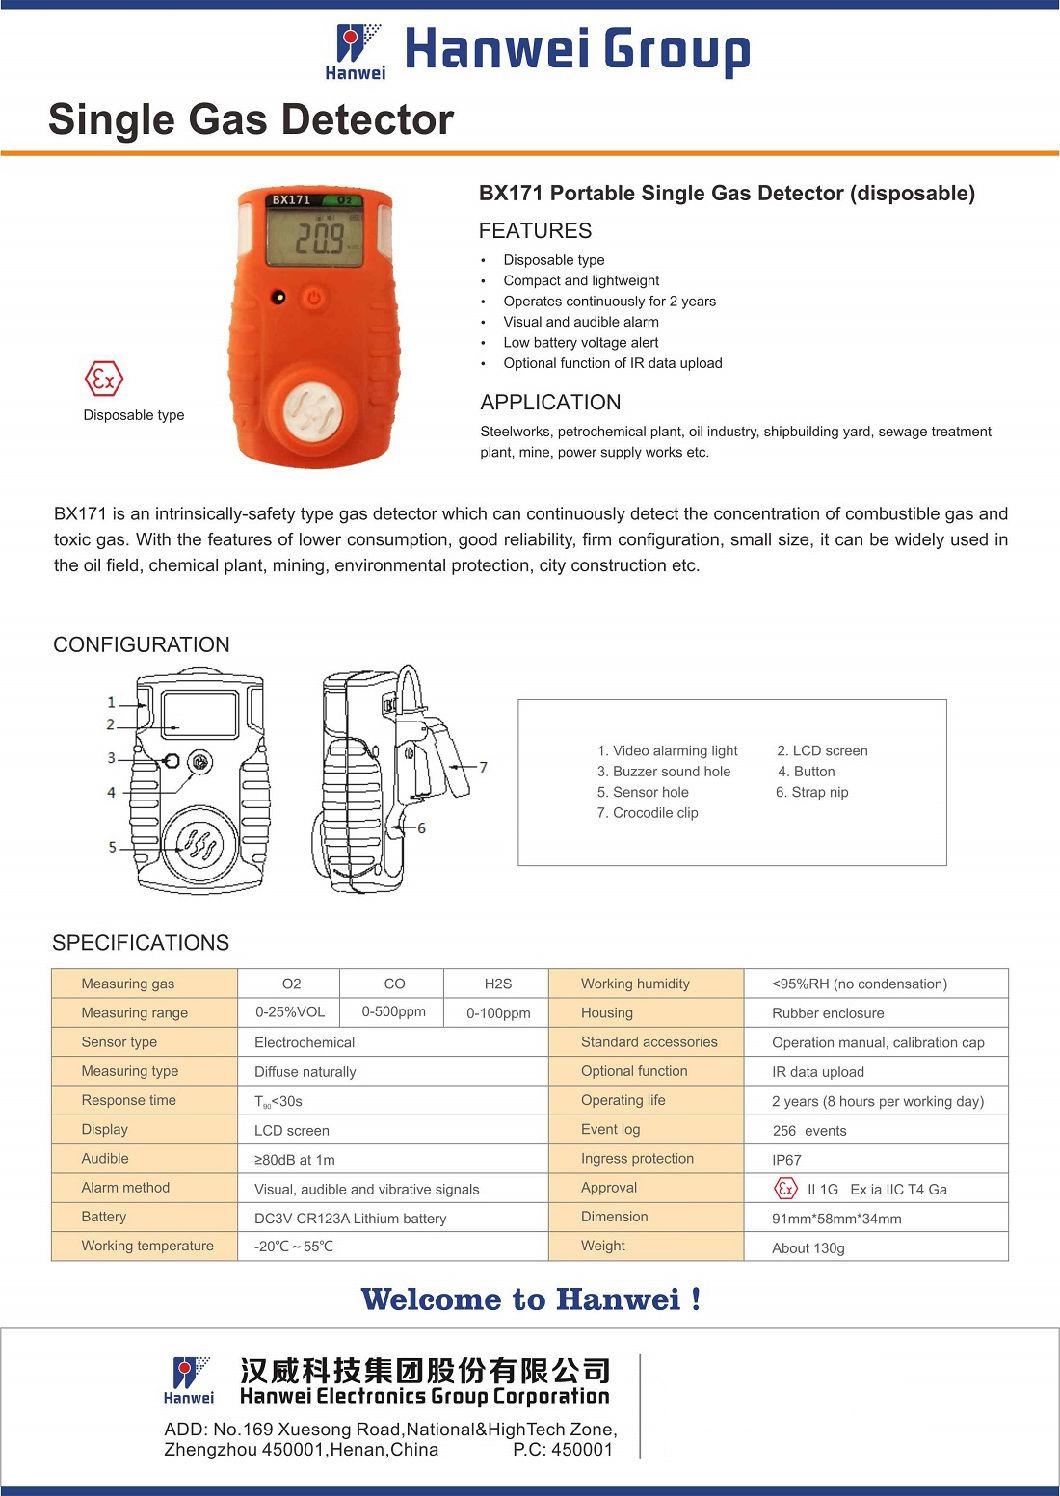 Factory Price 91*58*34mm Battery-Operated 132g Weight Diffusion Type Portable Gas Detector